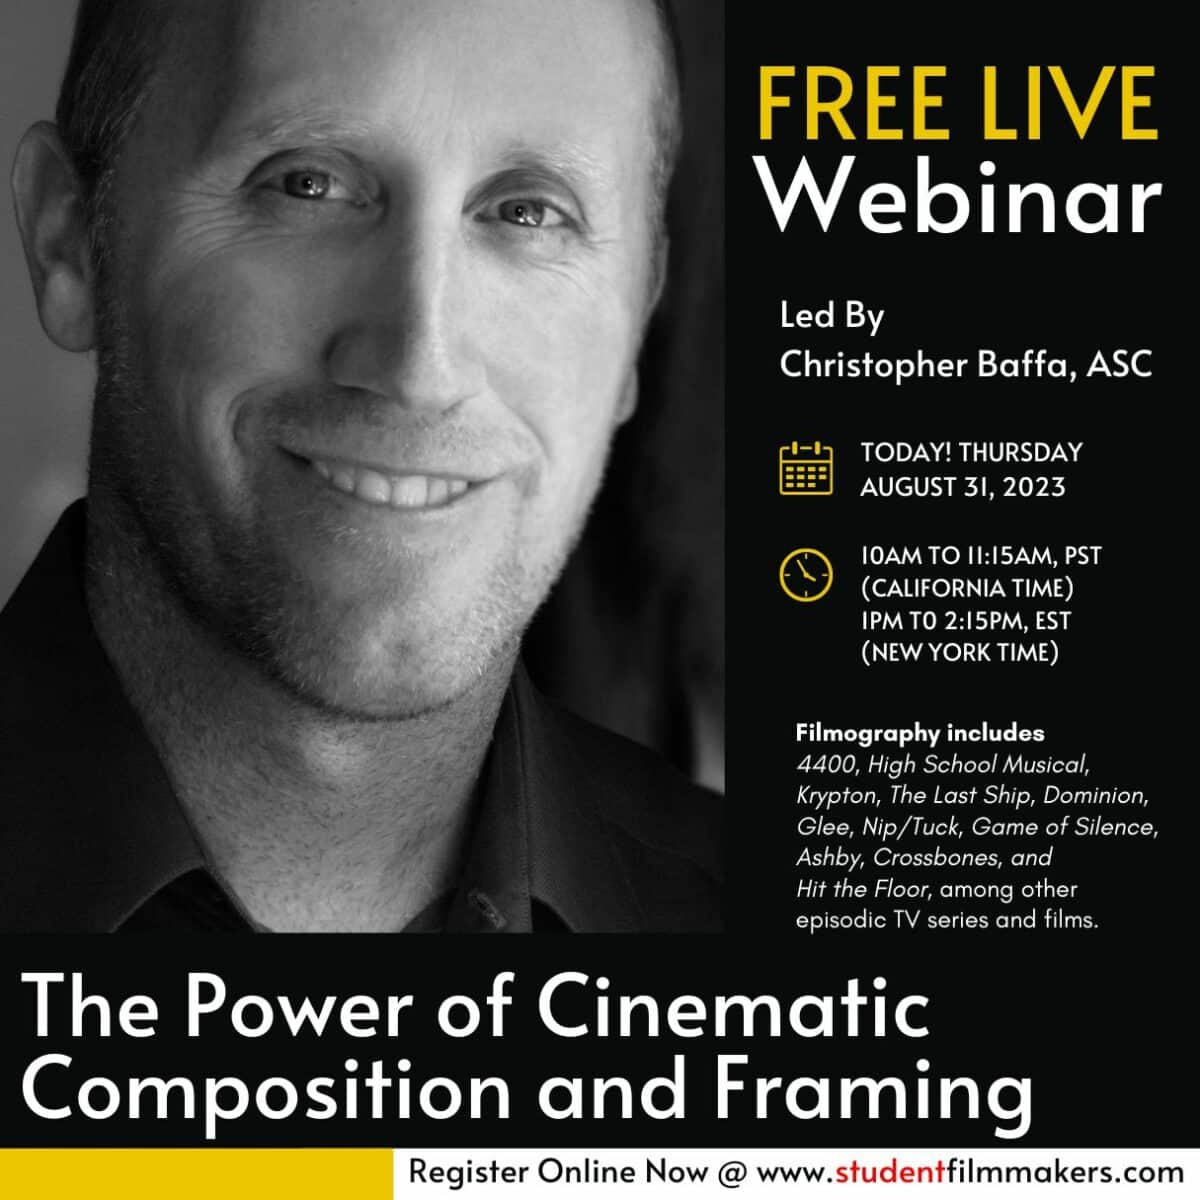 Live Webinar with Christopher Baffa, ASC: The Power of Cinematic Composition and Framing